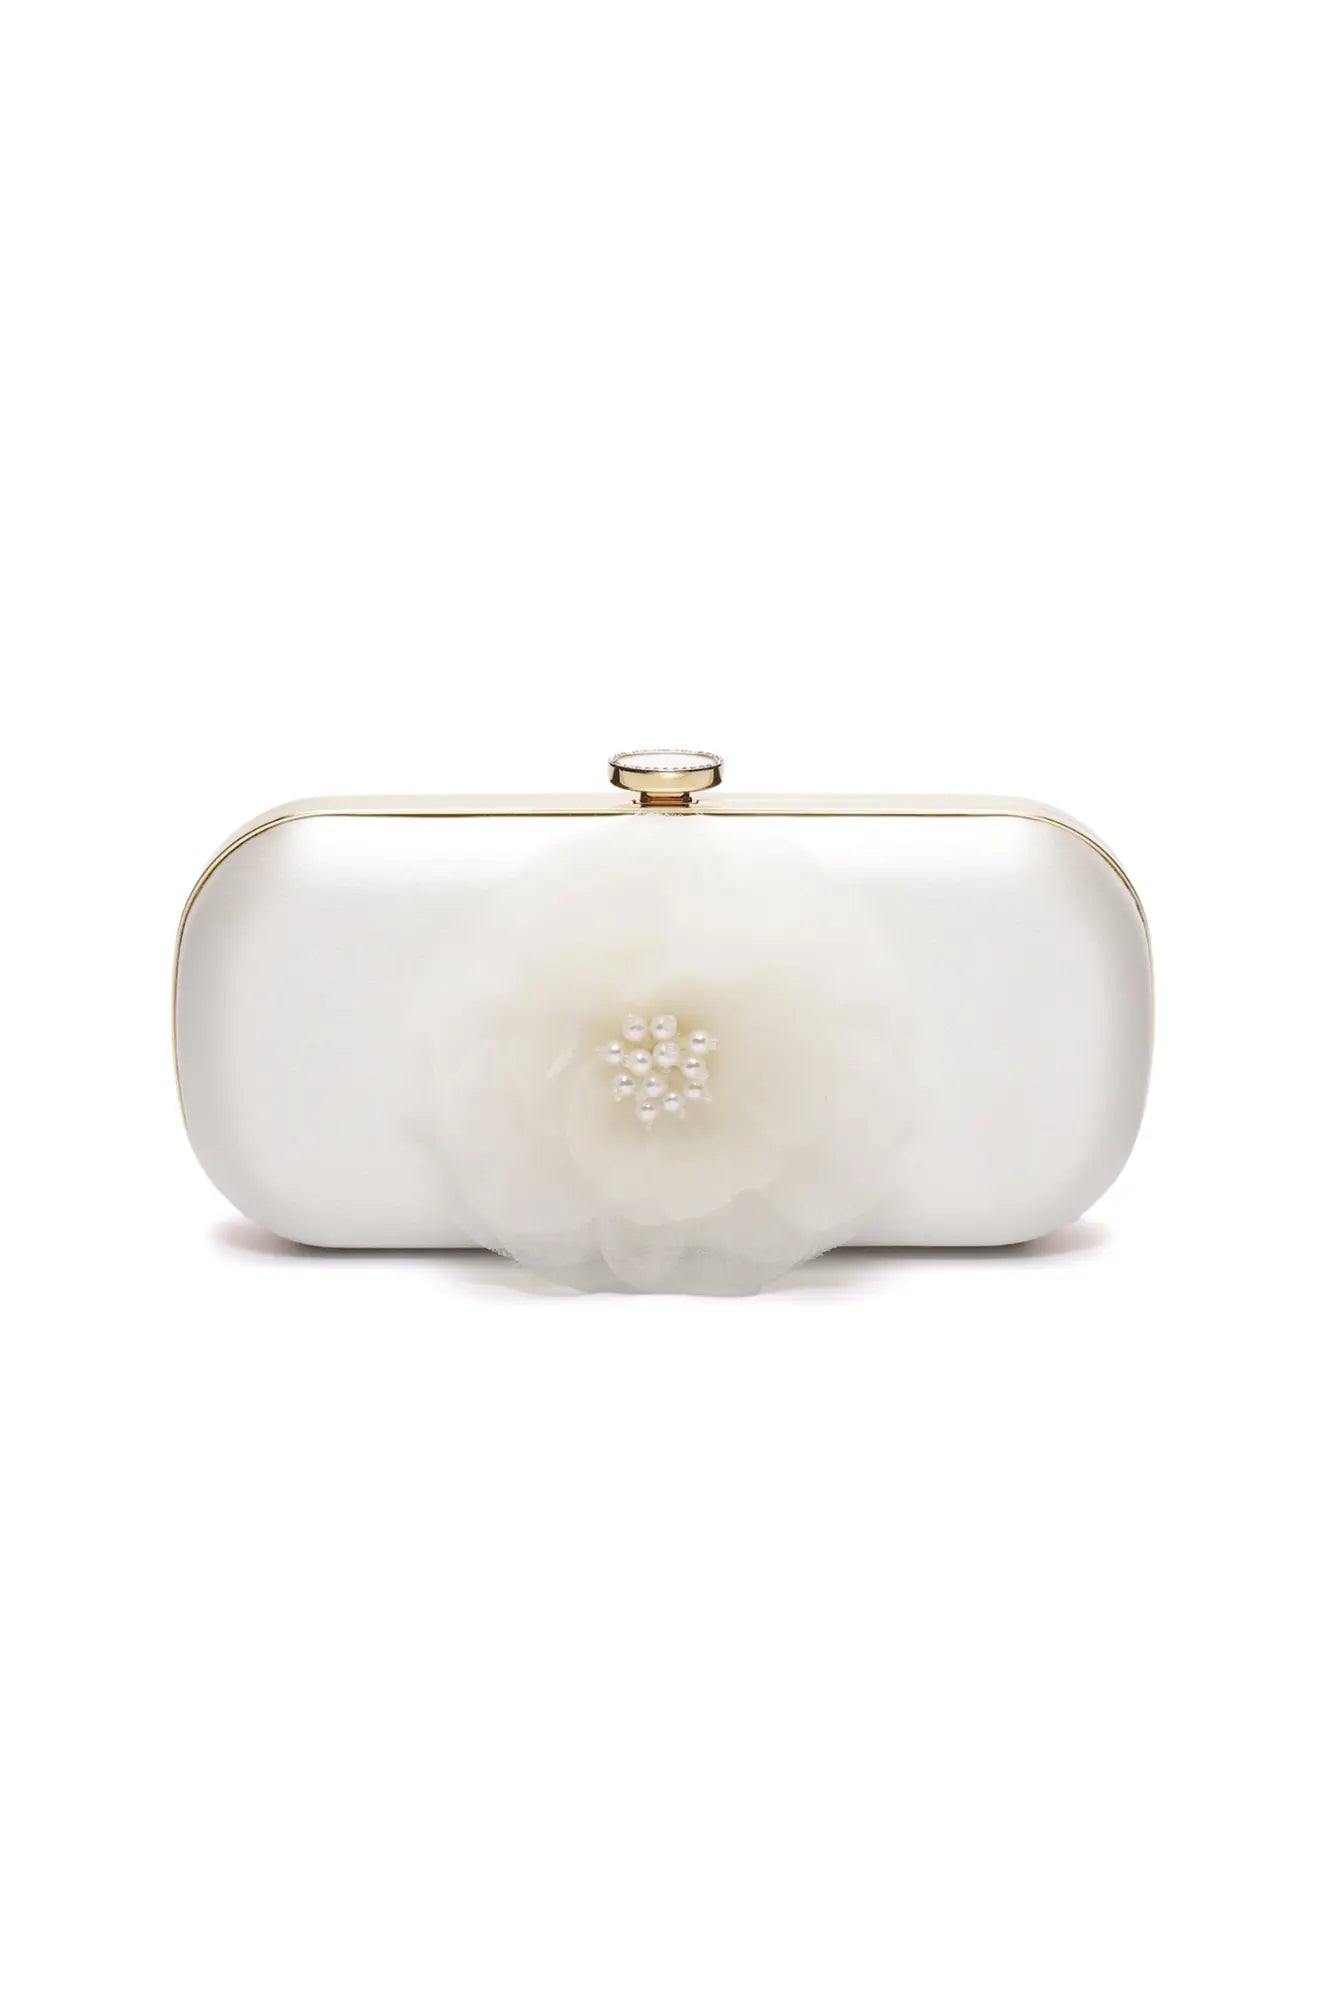 An elegant Bella Rosa Collection Ivory Grande Bella Fiori Clutch with a floral design and pearl embellishments on premium duchess satin.